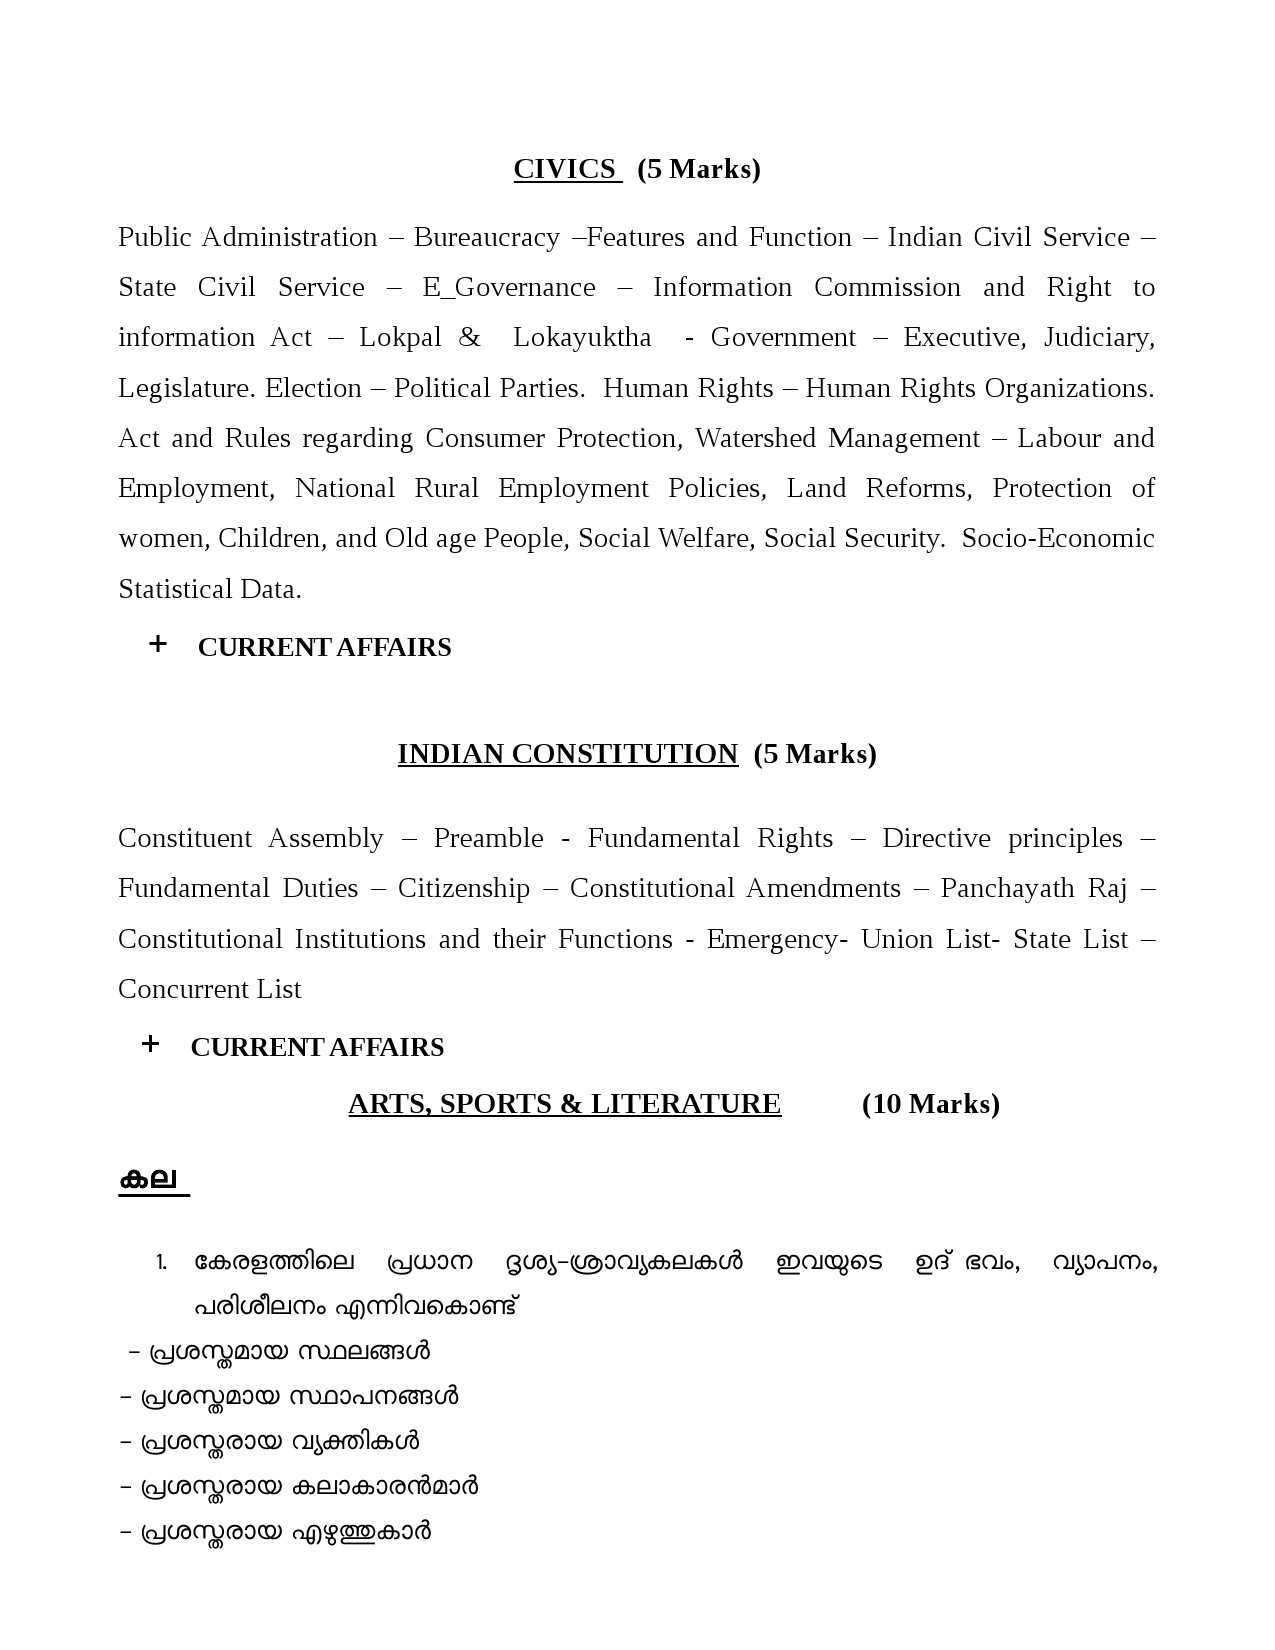 Detailed Syllabus for Common Preliminary Examination for Field Officer - Notification Image 4